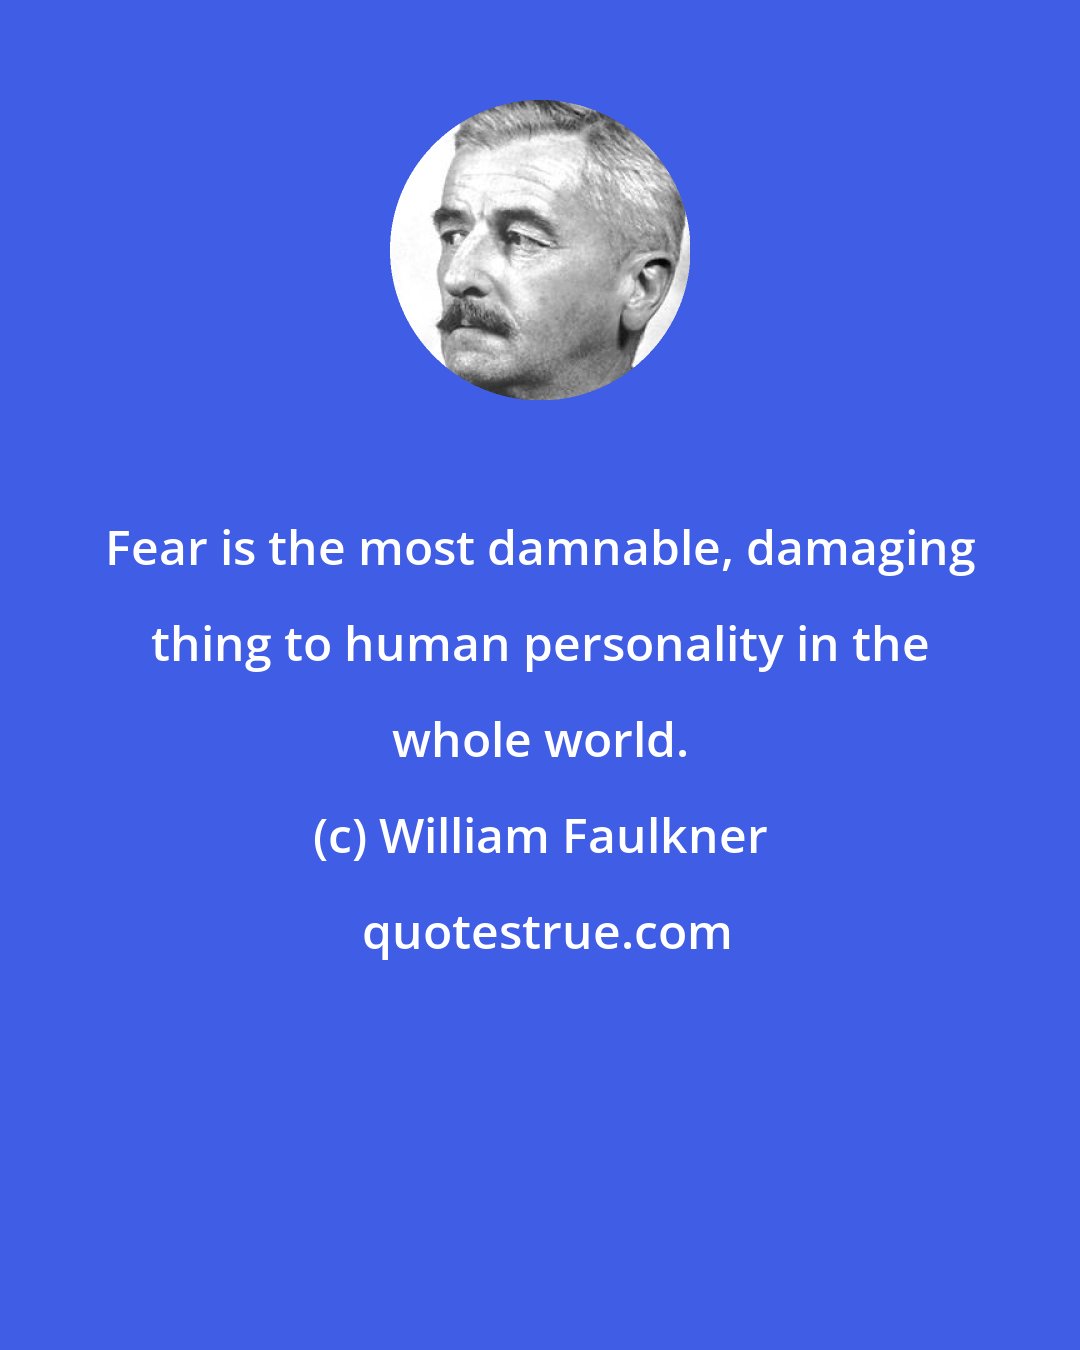 William Faulkner: Fear is the most damnable, damaging thing to human personality in the whole world.